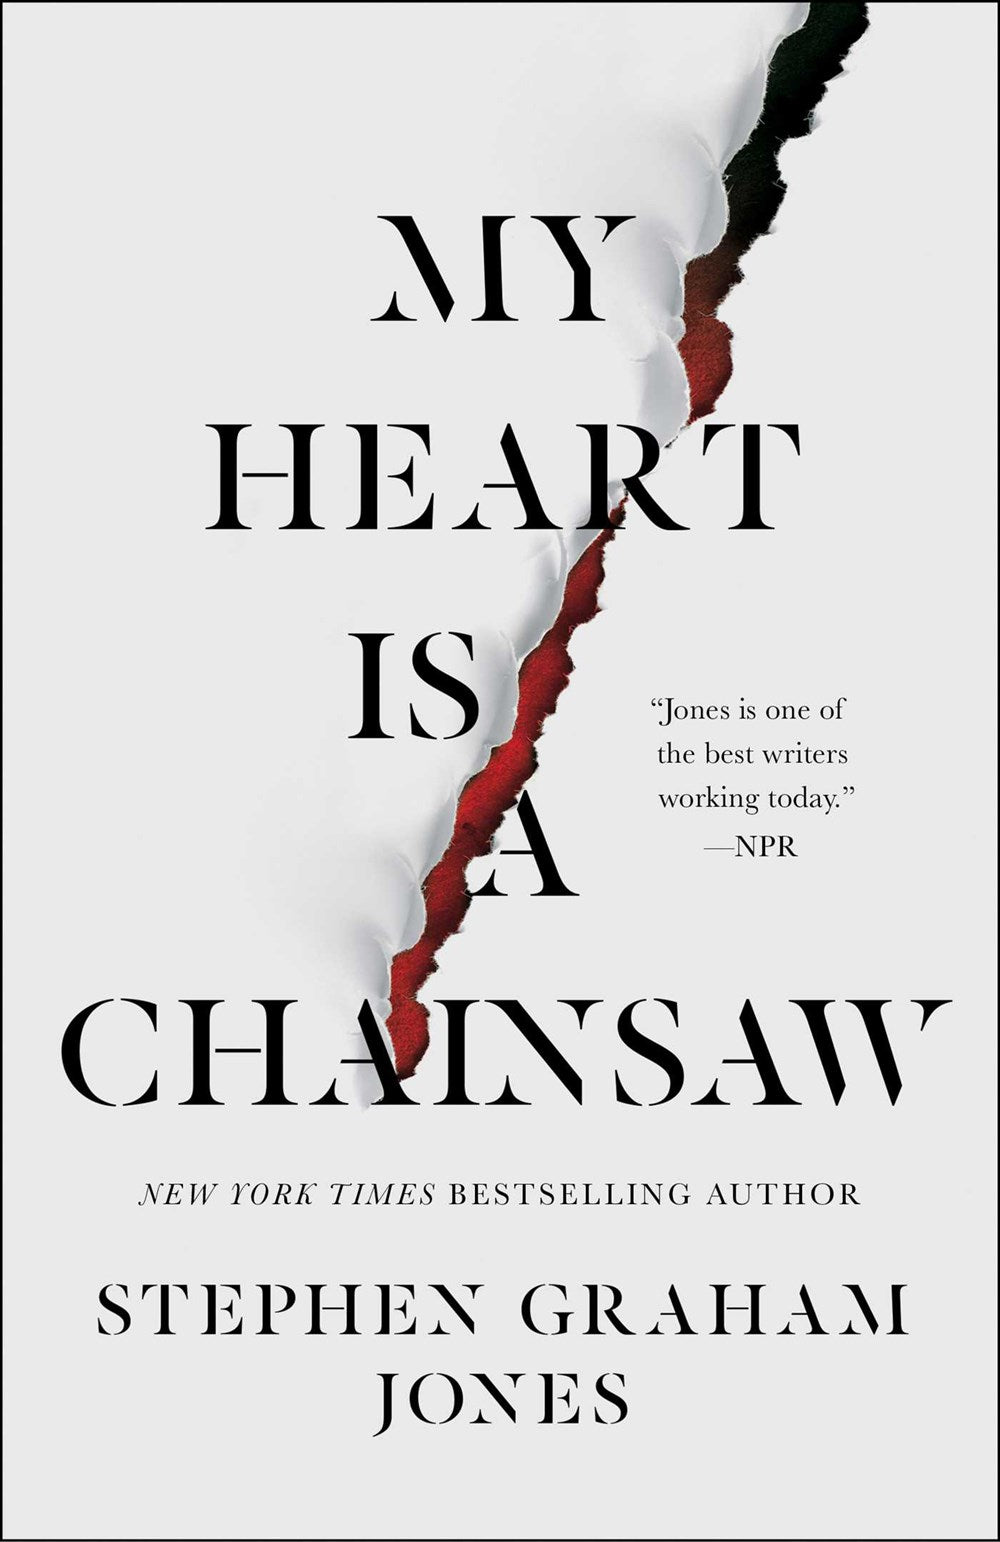 My Heart is a Chainsaw by Stephen Graham Jones (Hardcover) (The Indian Lake Trilogy #1)